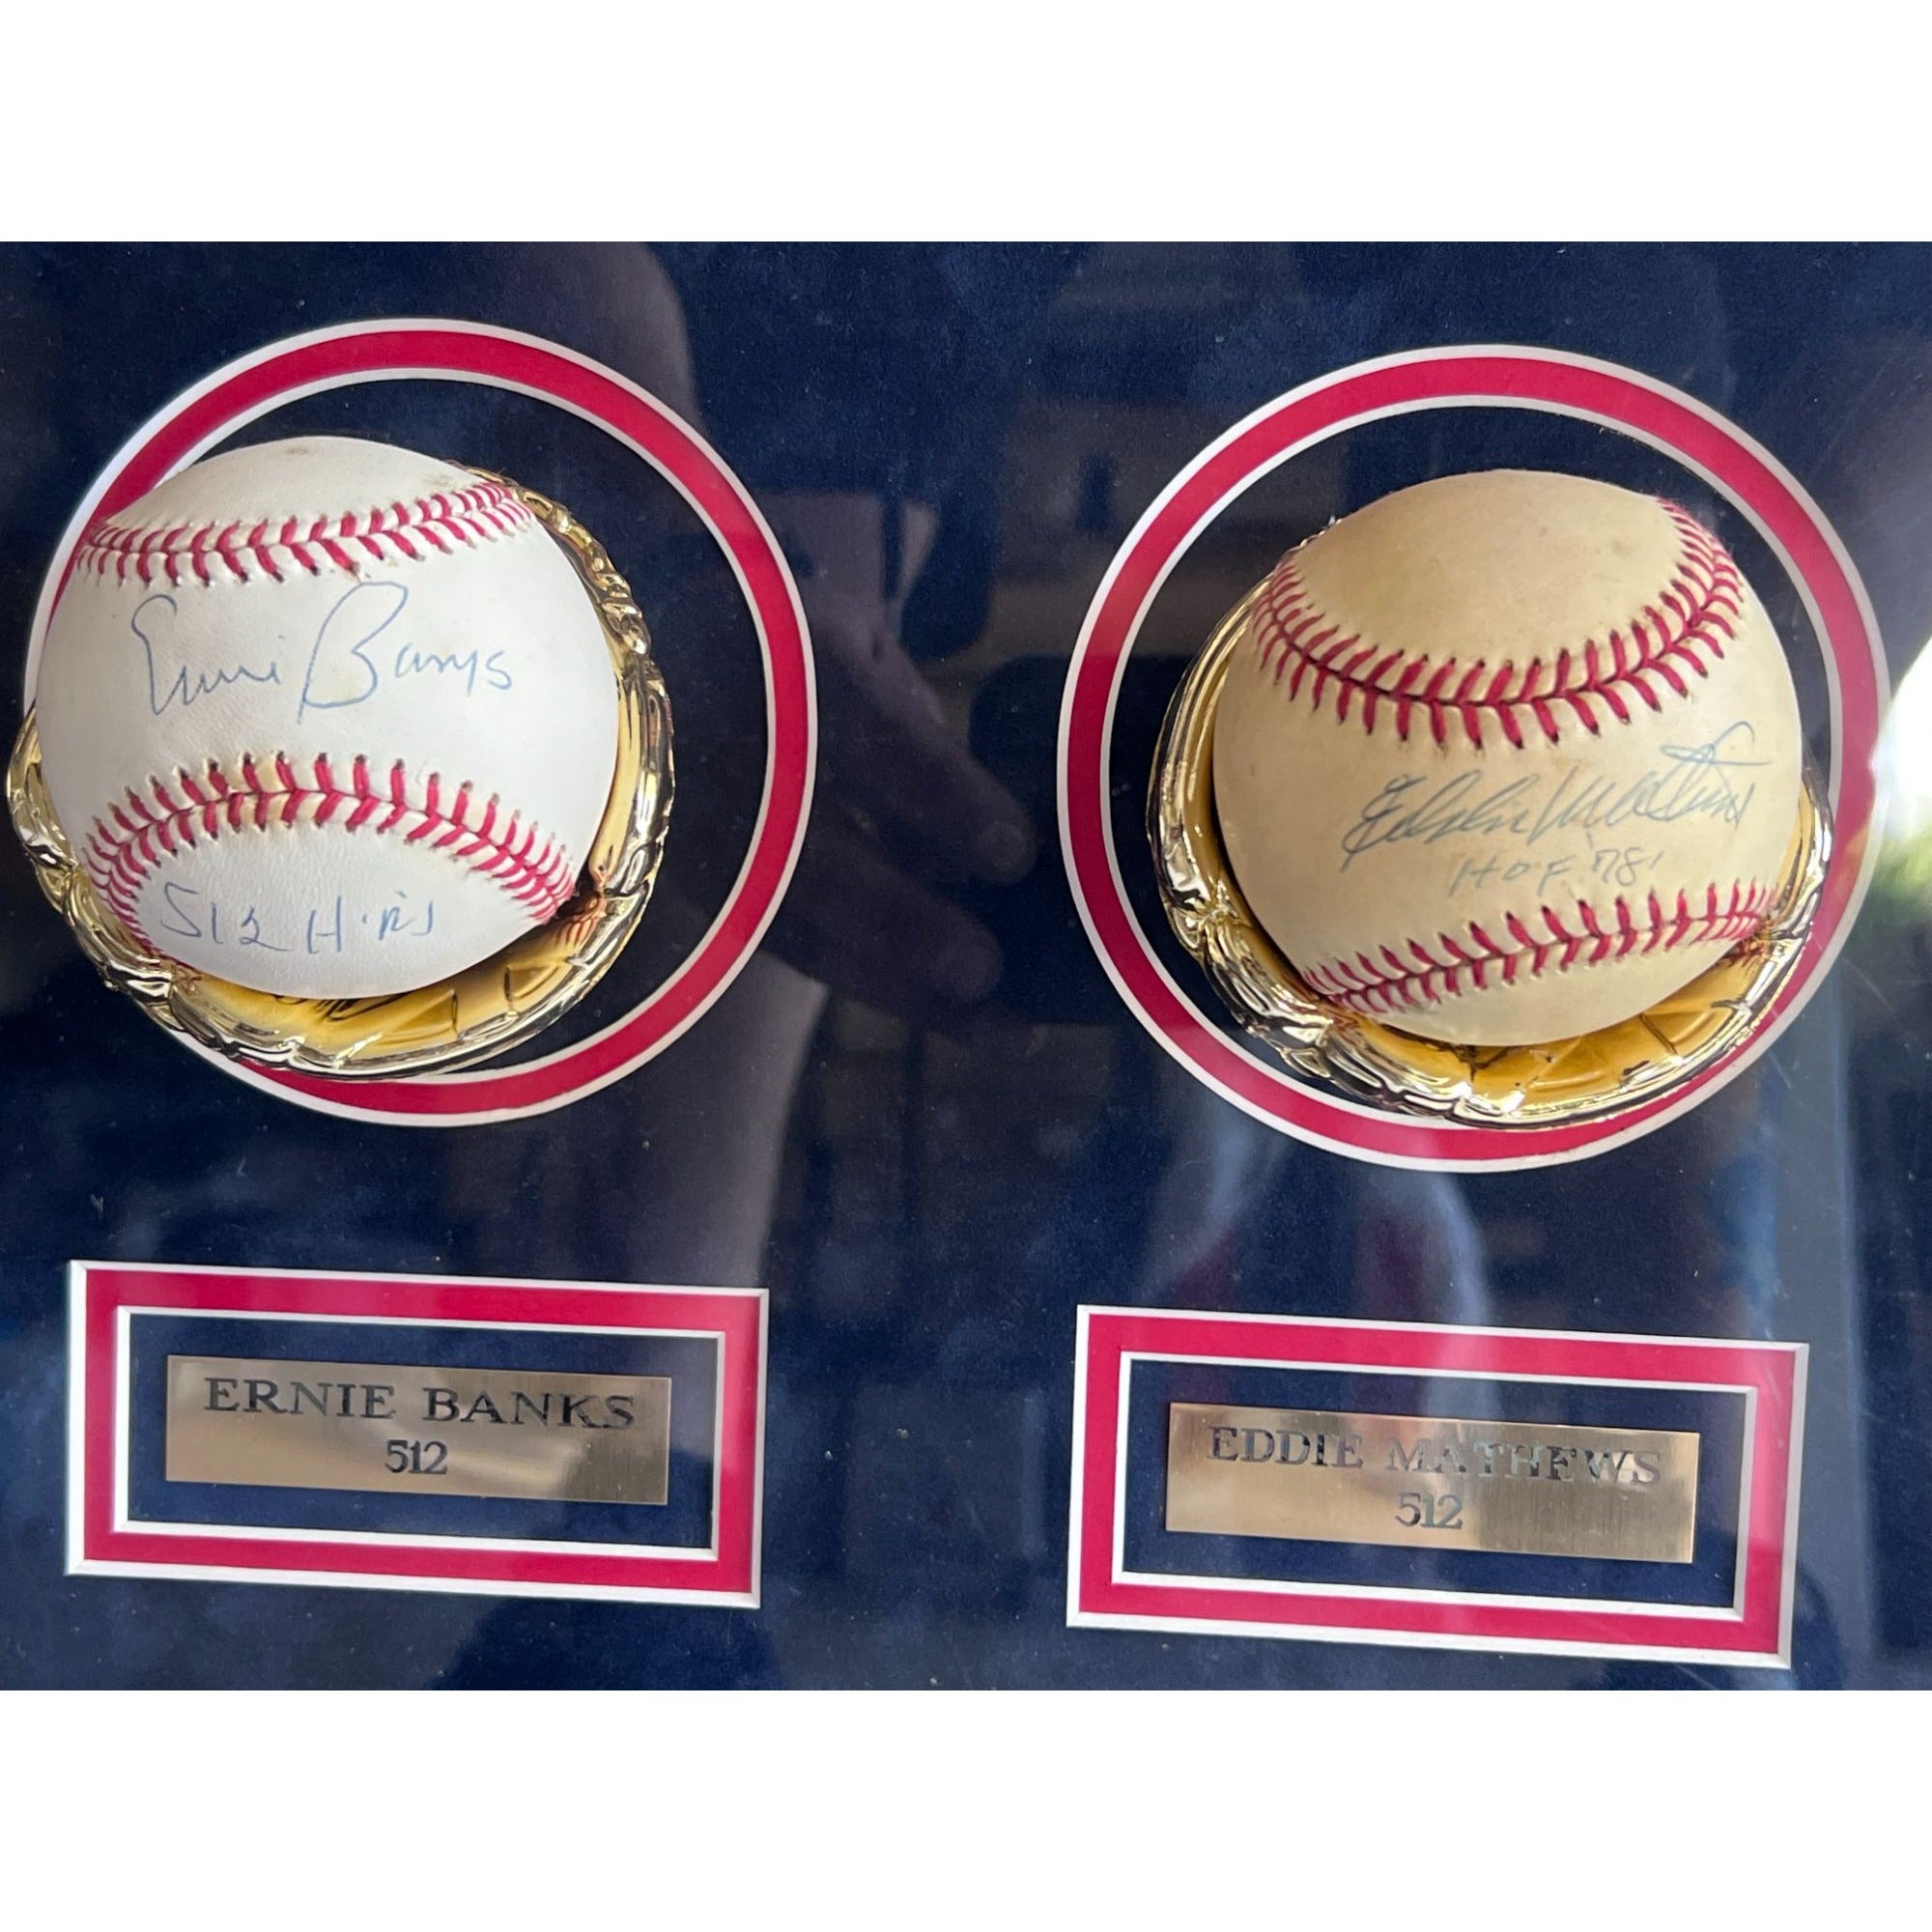 Willie Mays Mickey Mantle Ted Williams 14 MLB baseballs signed by 500 home run hitters 48x42 in frame